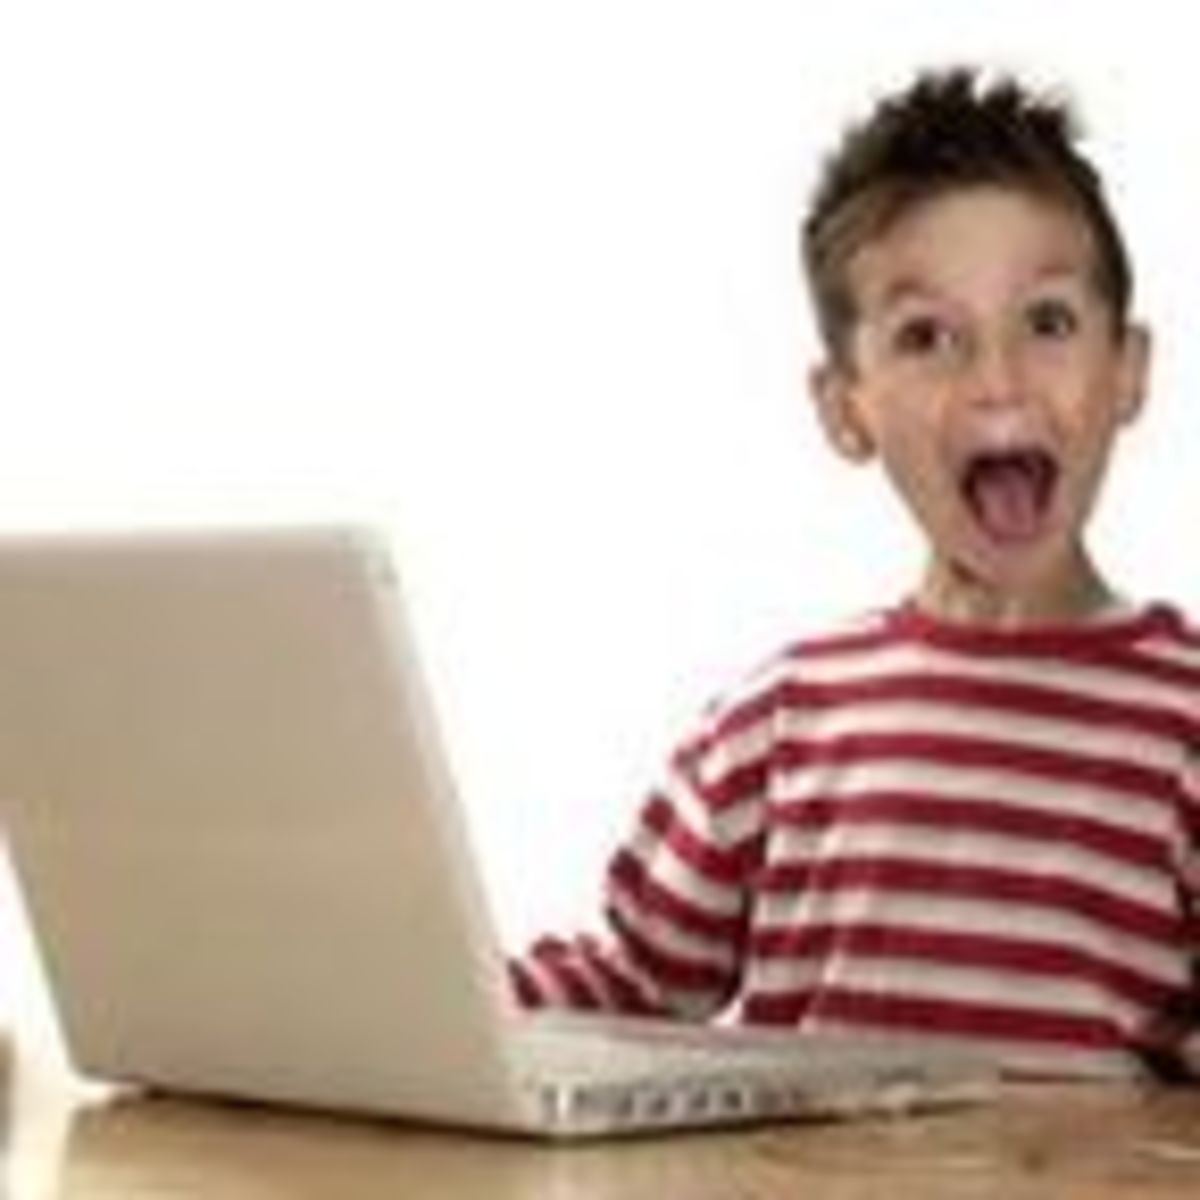 3d Toddler Porn - Pornography:The New Sex Ed For Kids | Psychology Today